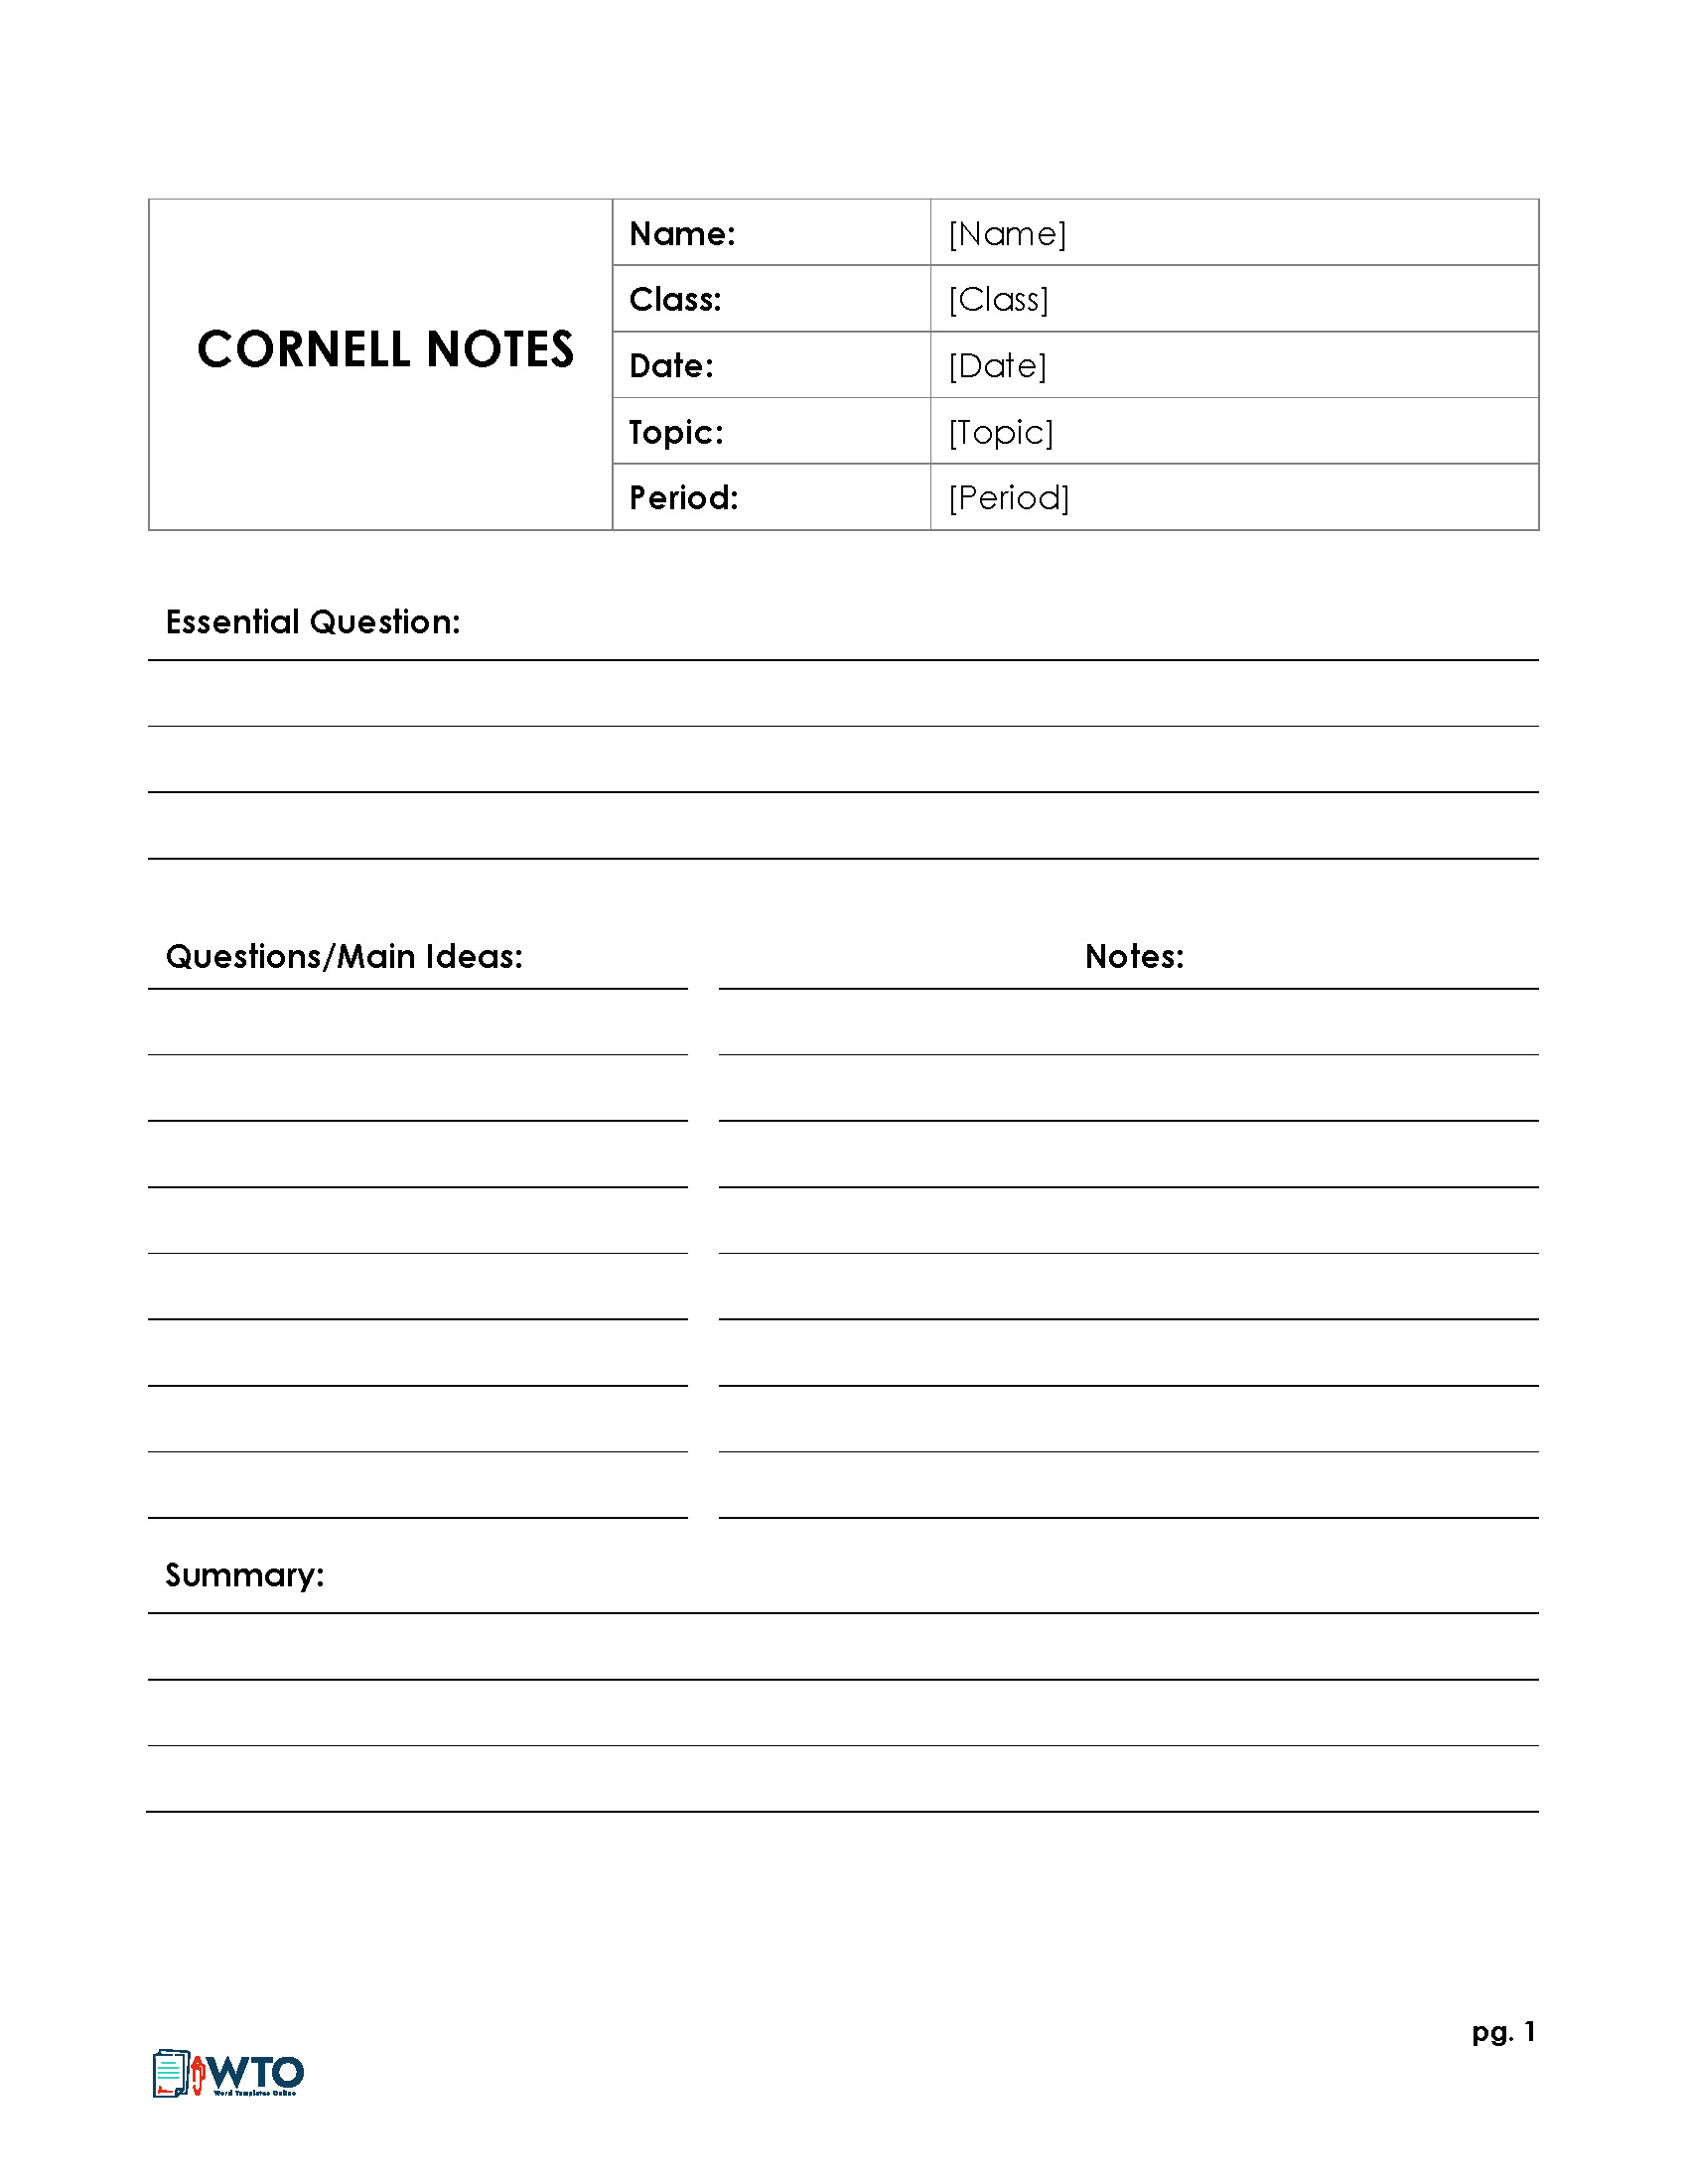 11 Free Cornell Note Templates (with Cornell Note Taking Explained) Regarding Cornell Note Template Word